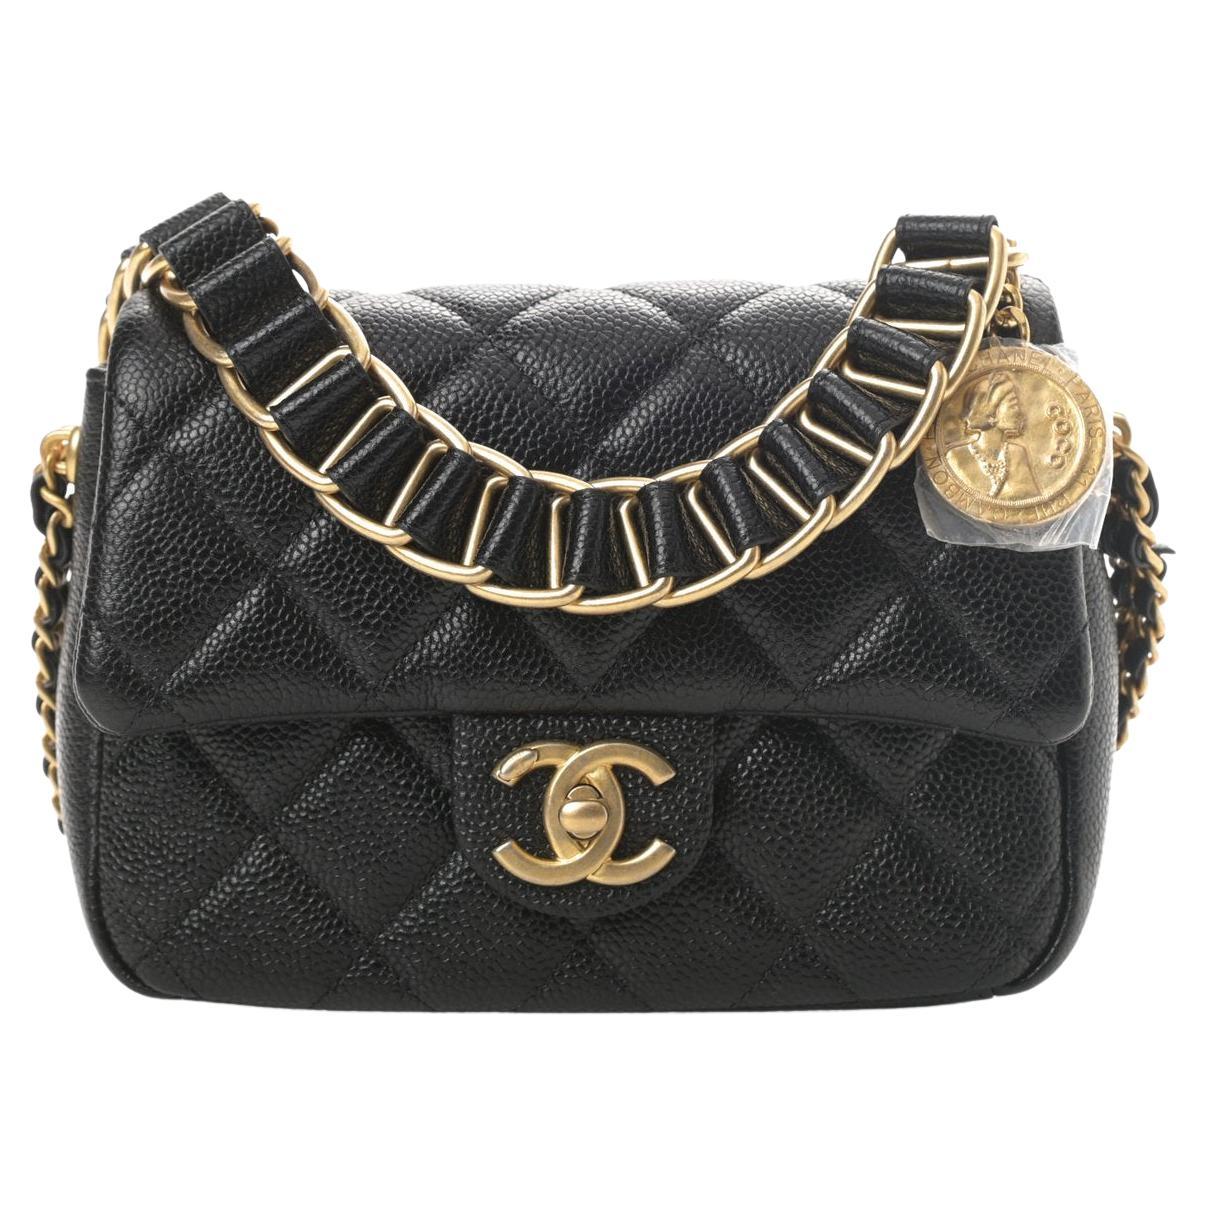 CHANEL NEW Black Caviar Leather Quilted Gold Hardware Mini Chain Soul Flap Bag